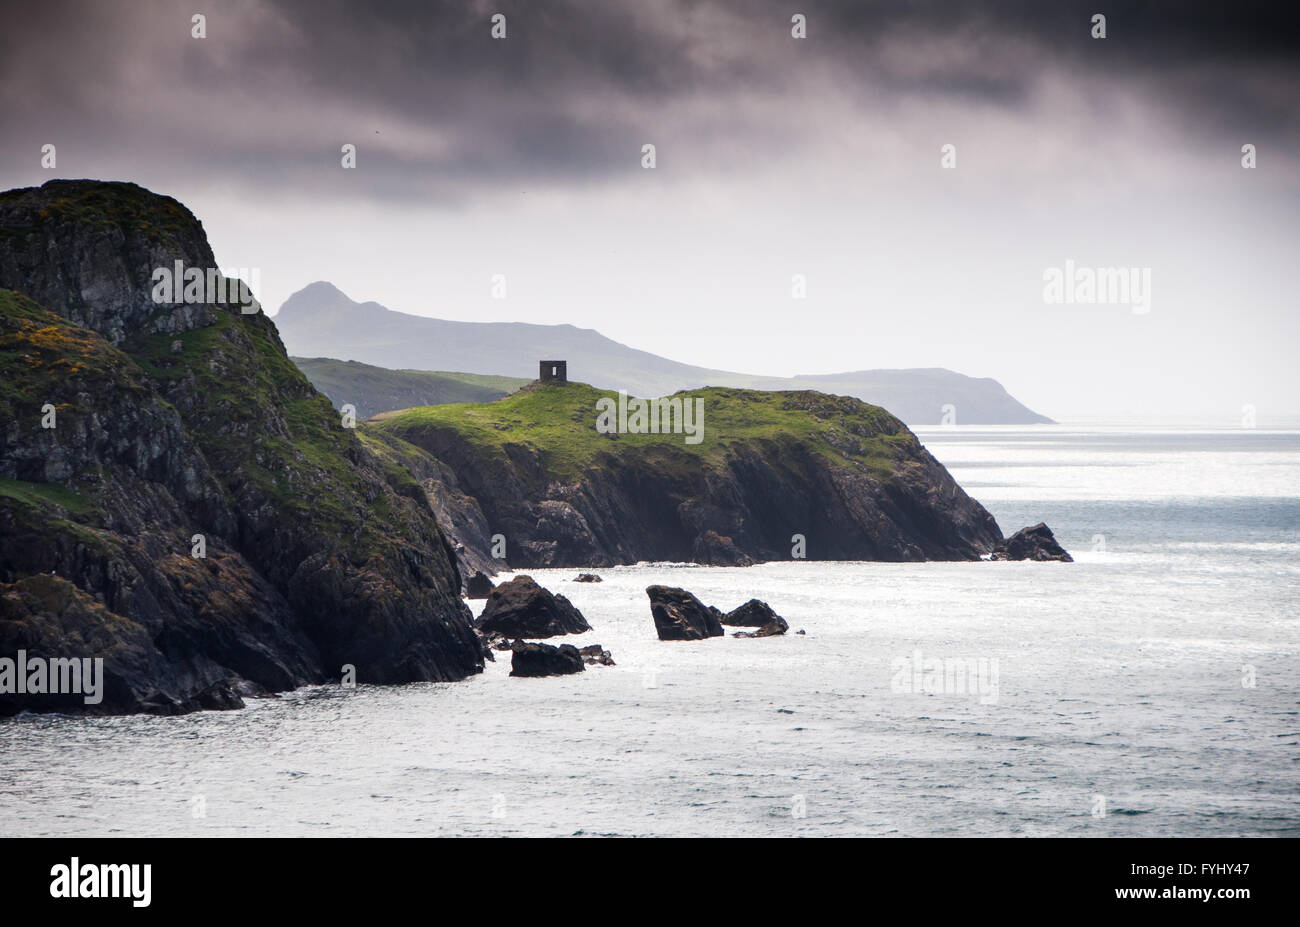 Old quarry buildings top the cliffs at Abereiddy in the Pembrokeshire Coast National Park, Wales. Stock Photo